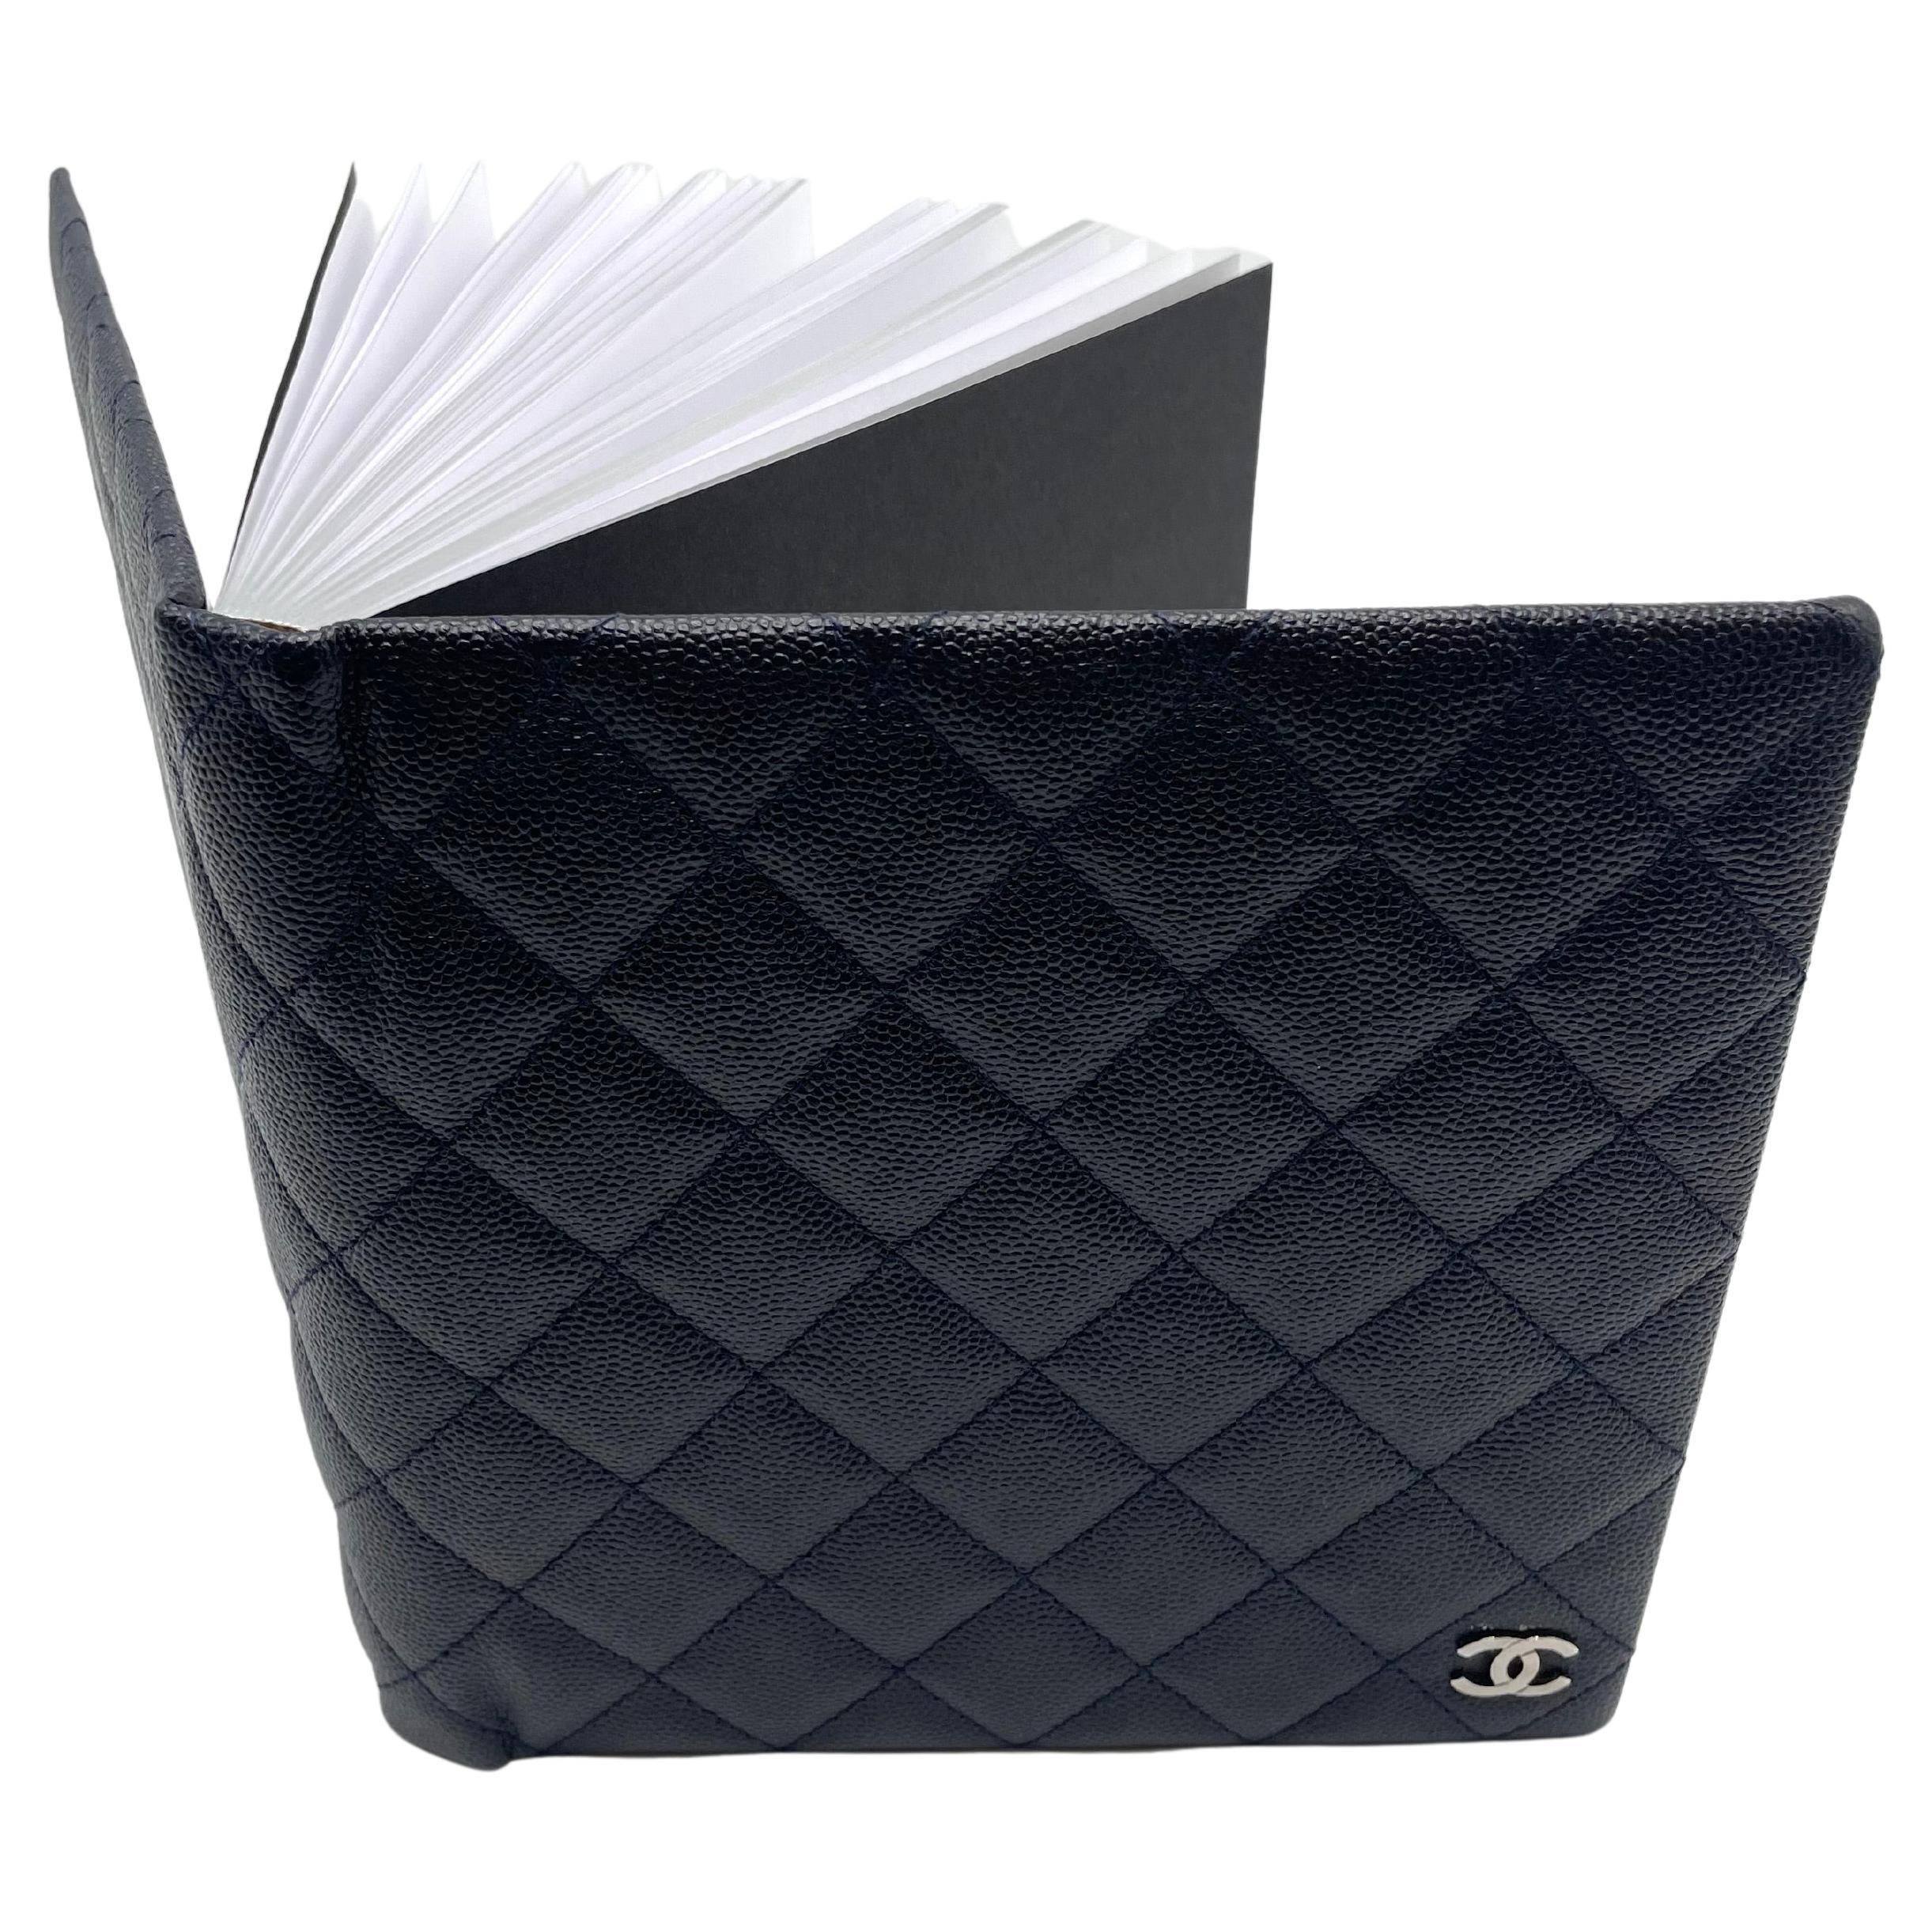 Chanel Black Quilted Leather Note Book 